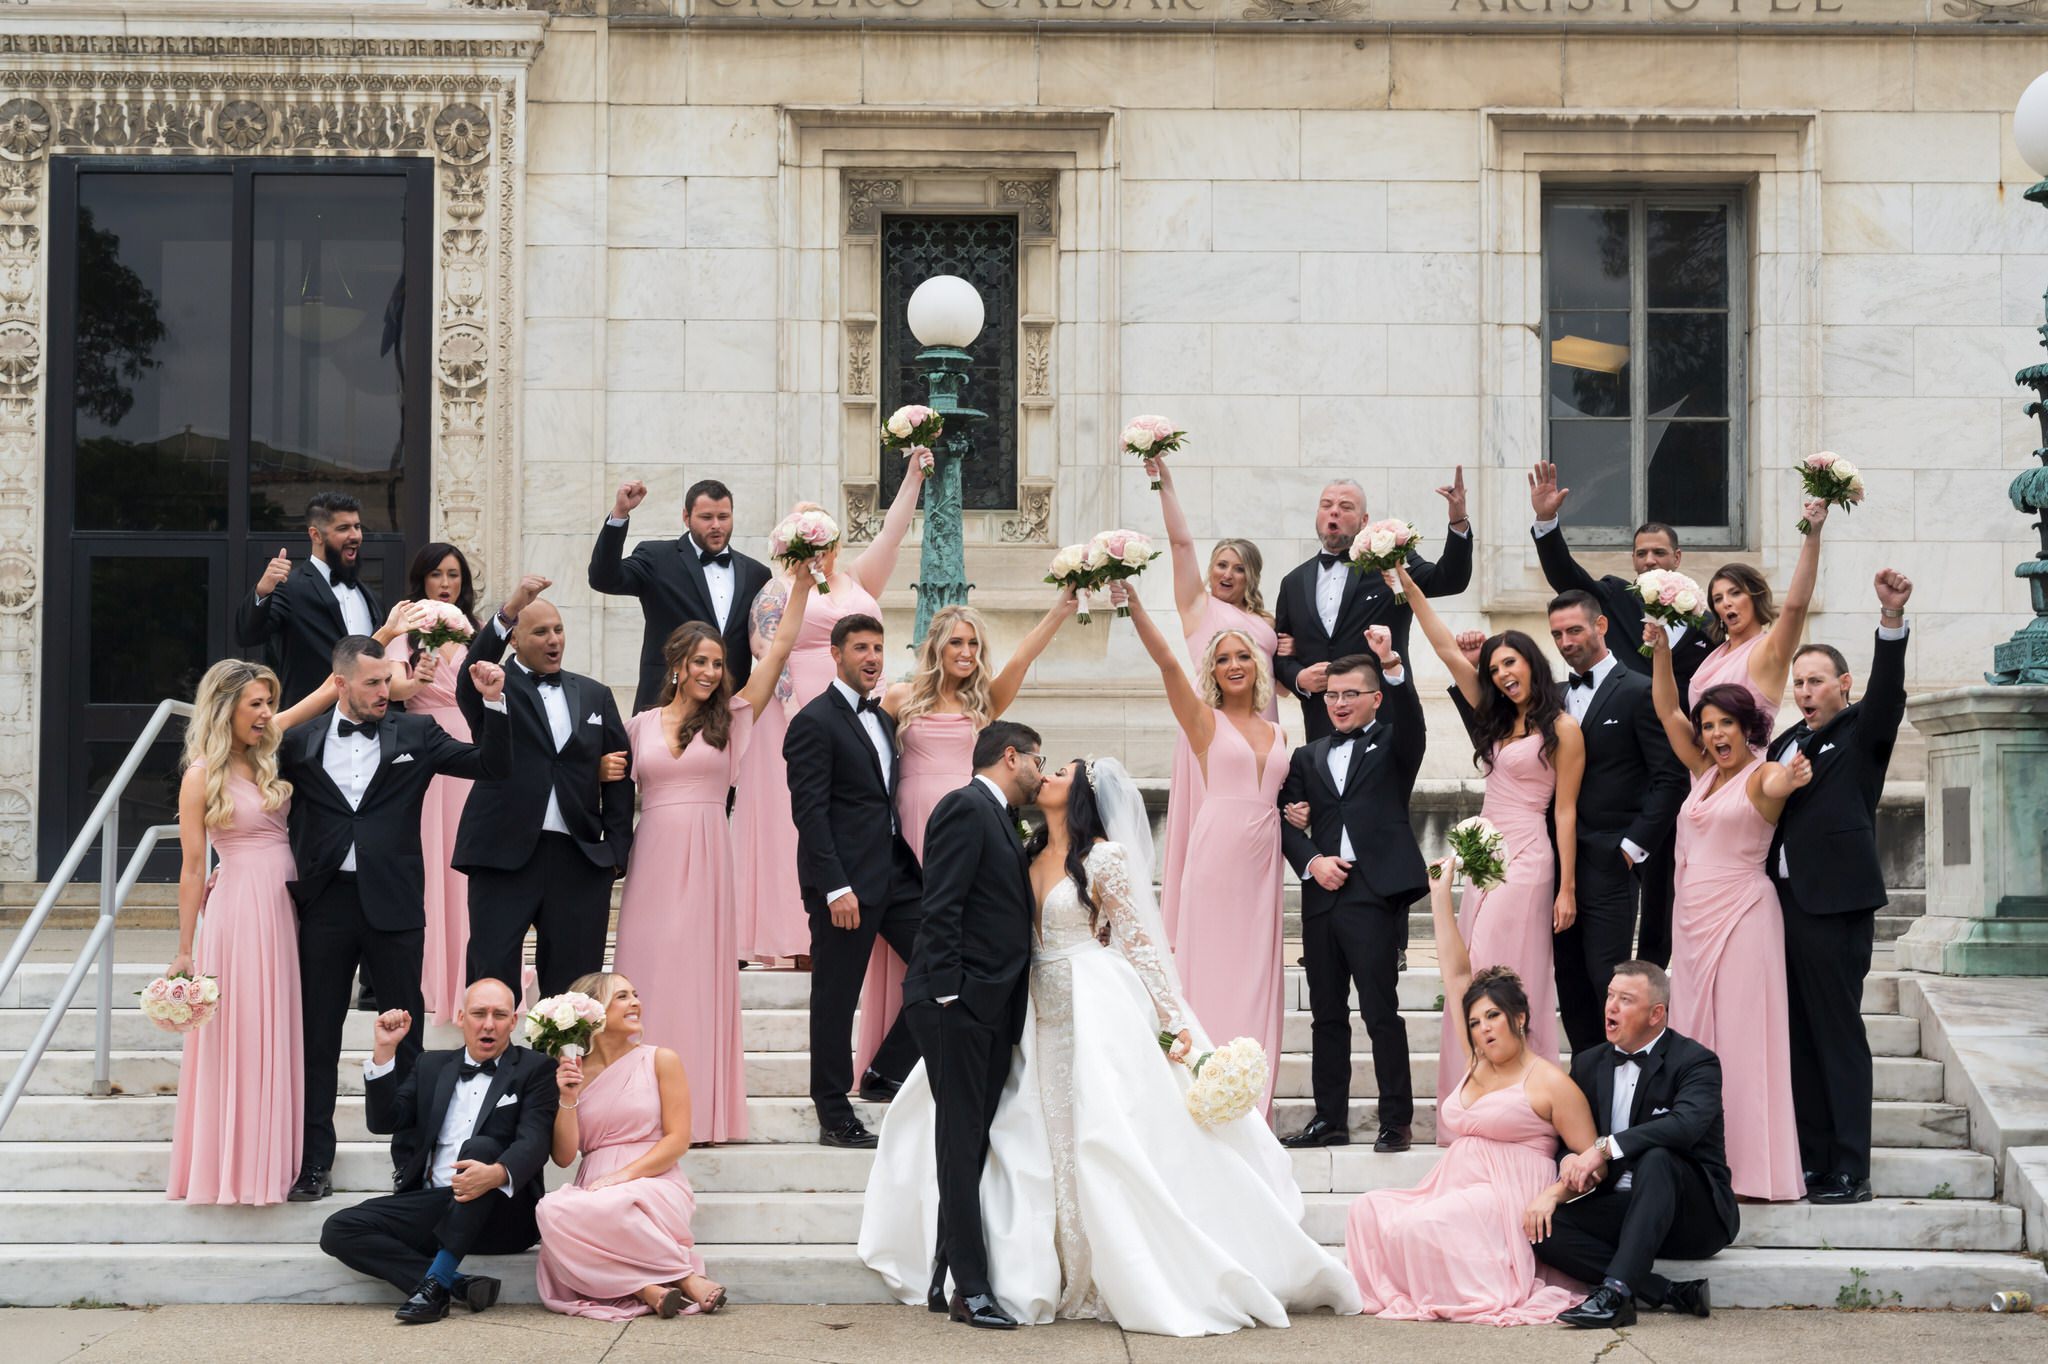 A bridal party, wearing pink and black, poses on the steps of the Detroit Public Library.